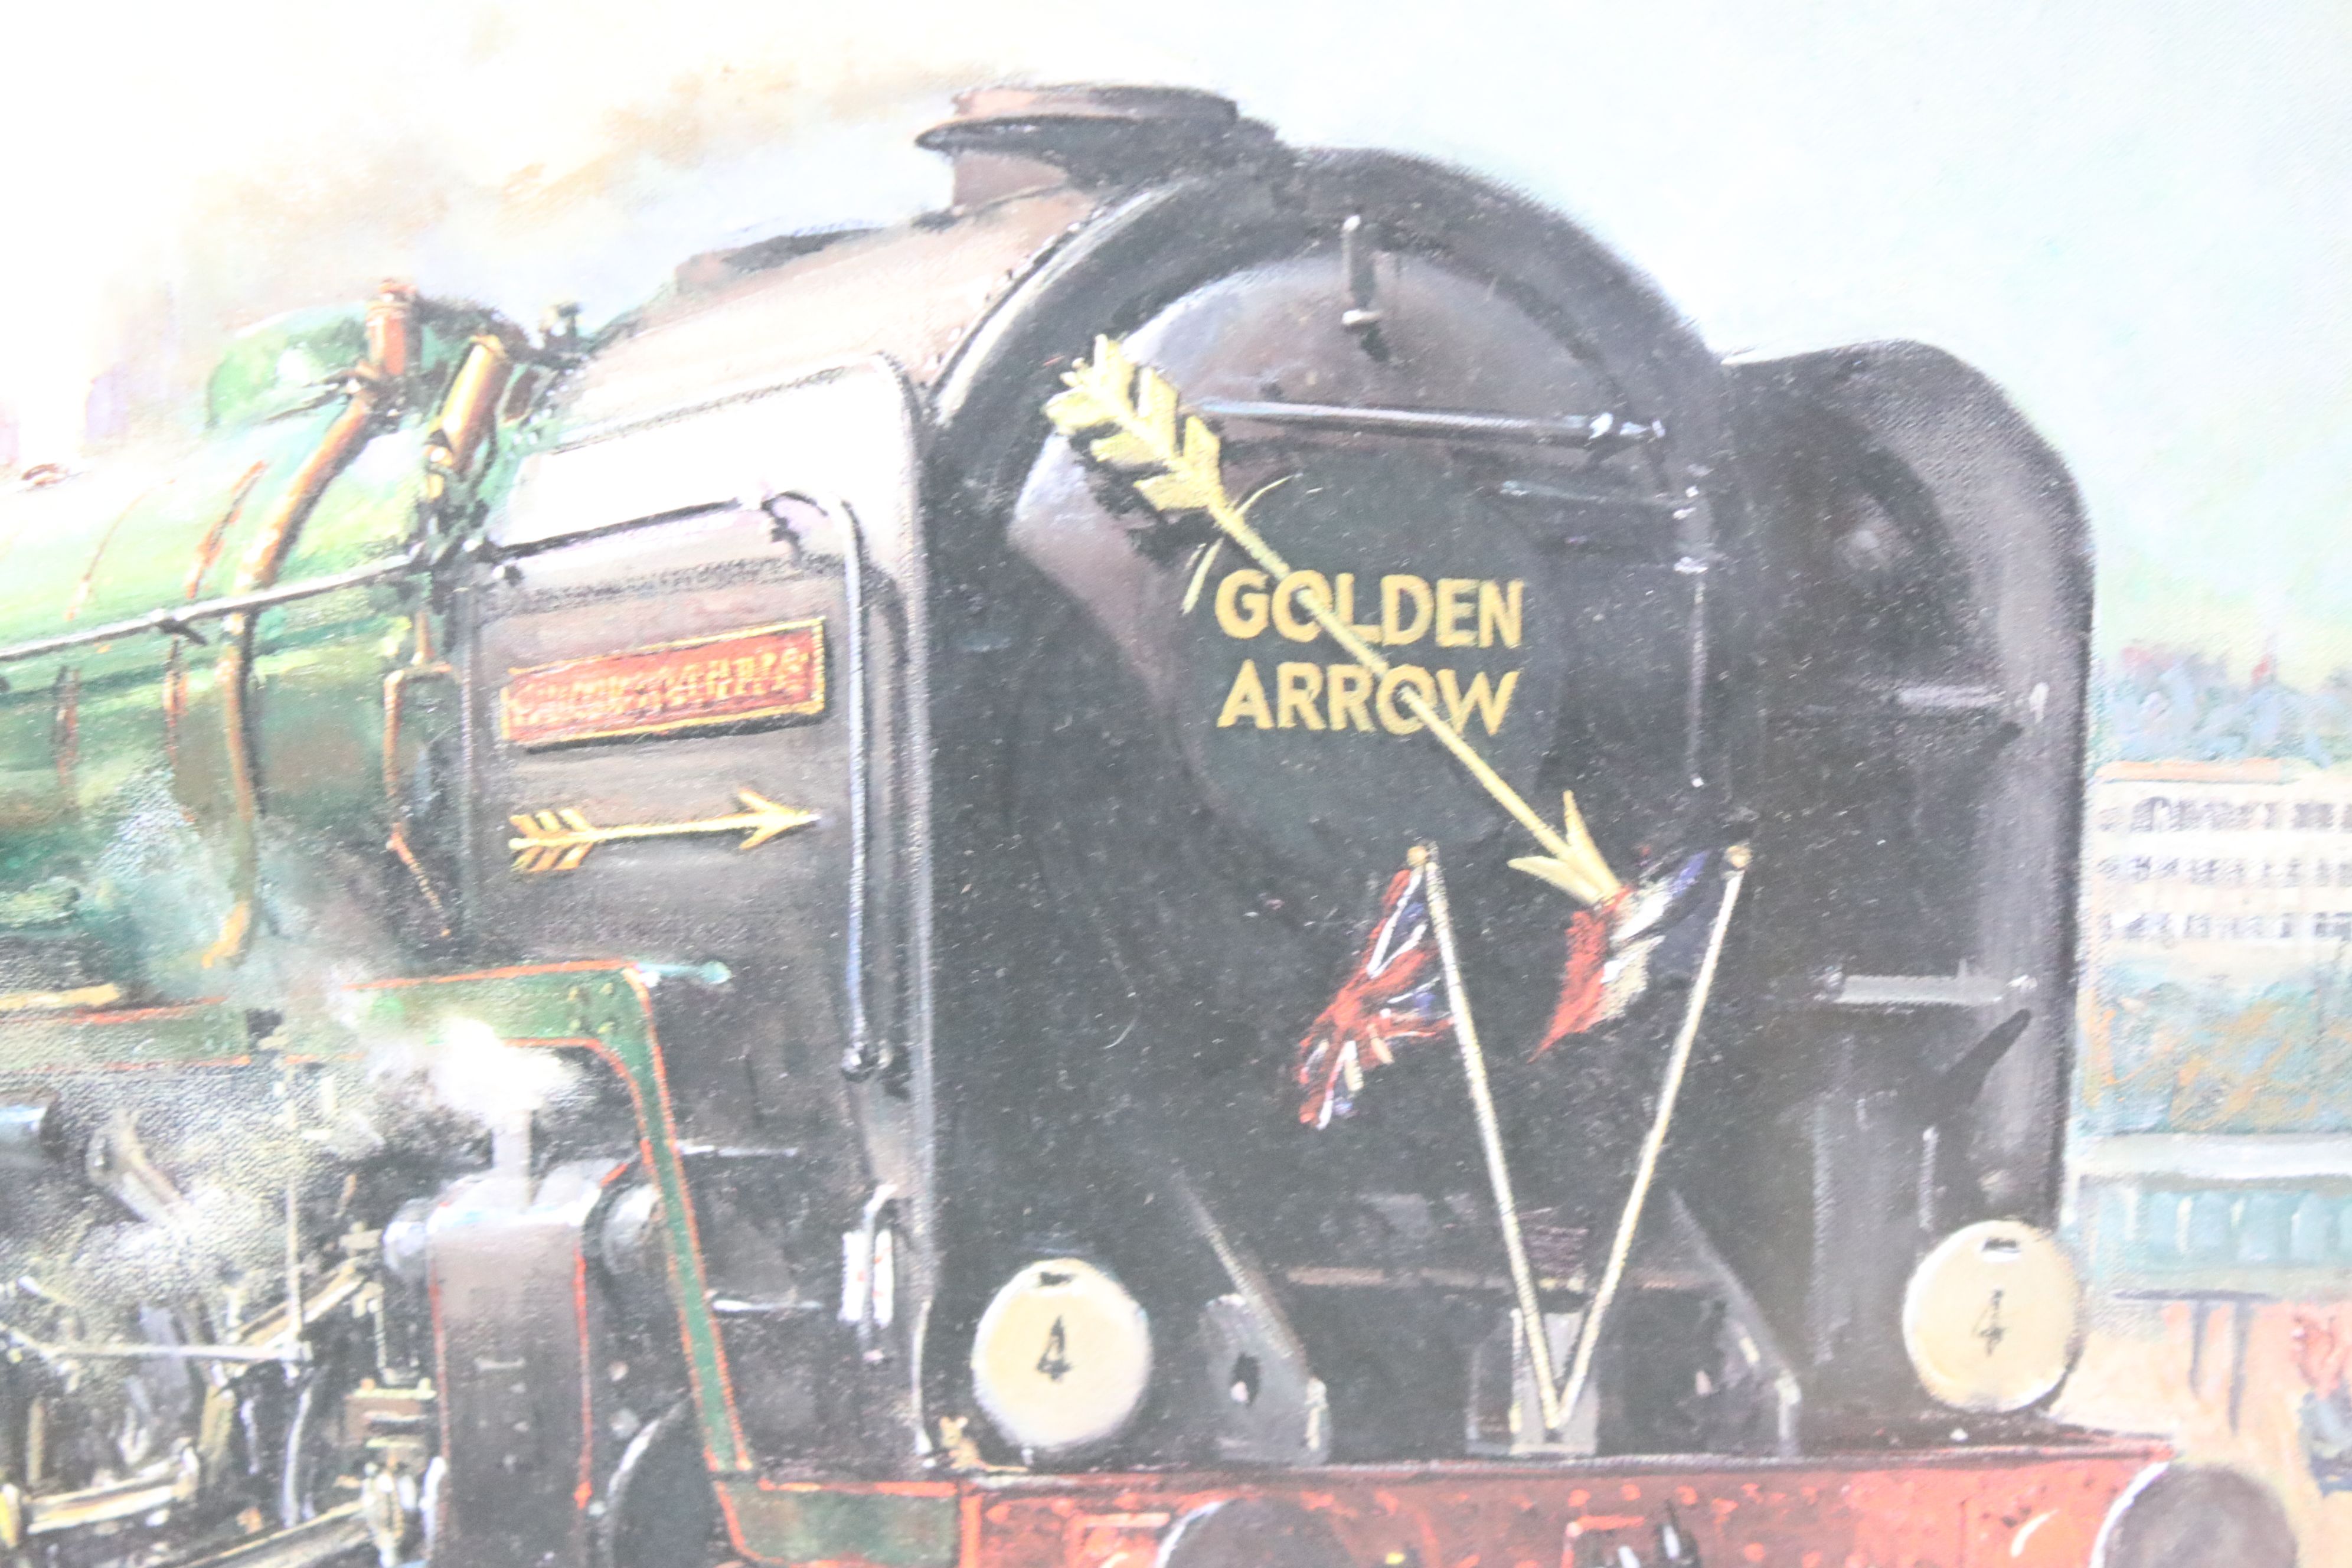 Terence Cuneo, Signed Limited Edition Print ' The Golden Arrow ' no. 550/850, 49cm x 62cm, framed - Image 3 of 8